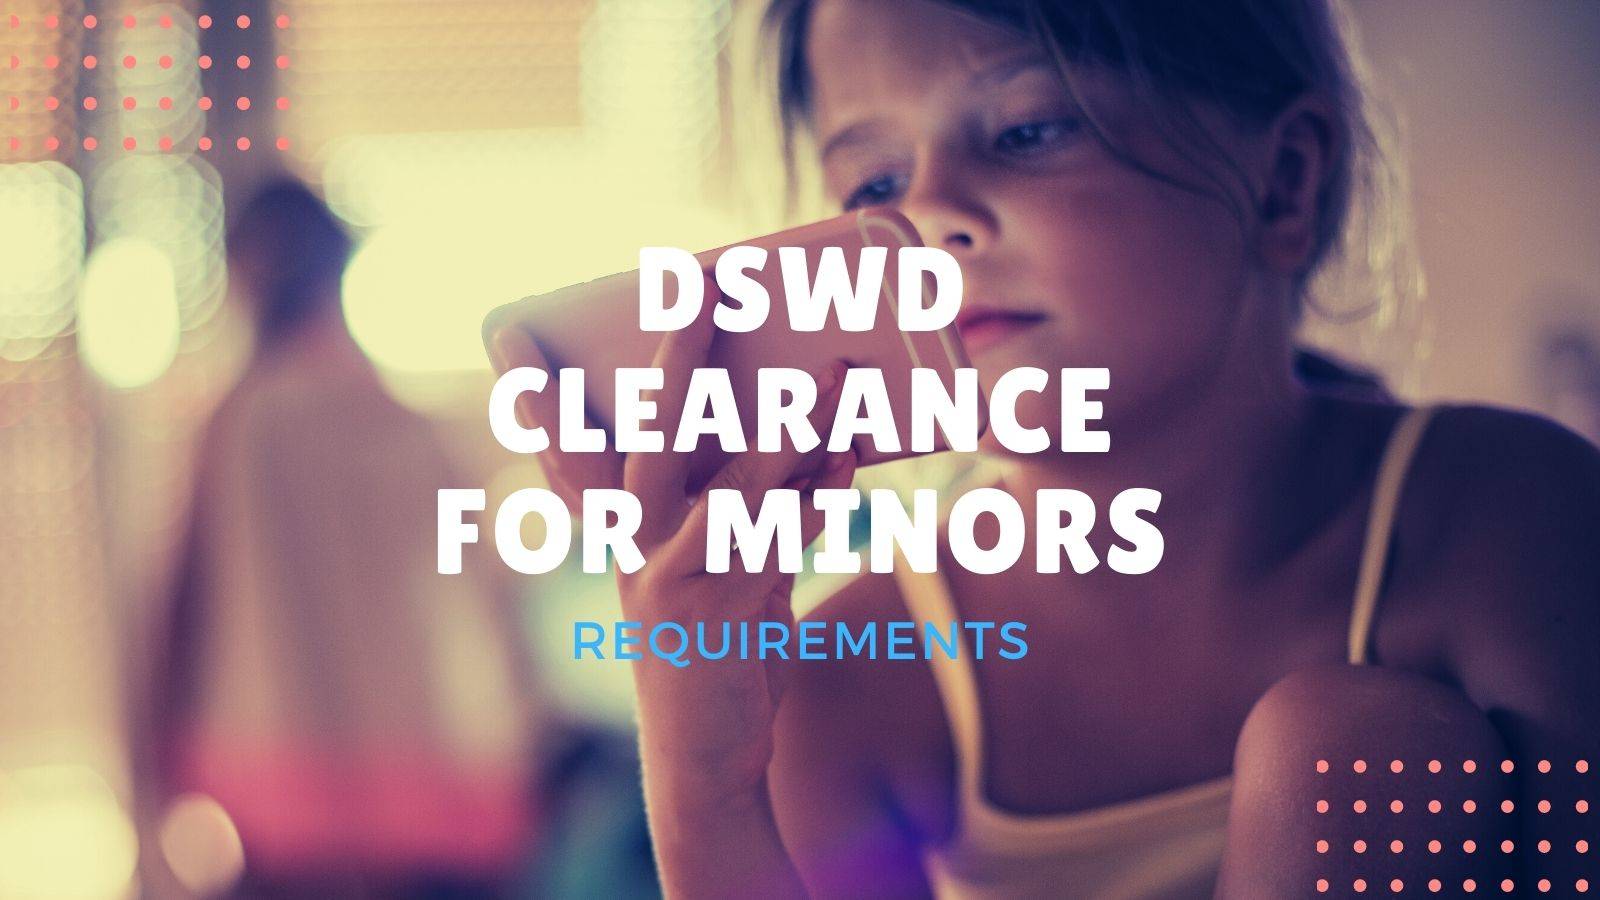 dswd travel clearance requirements for minors